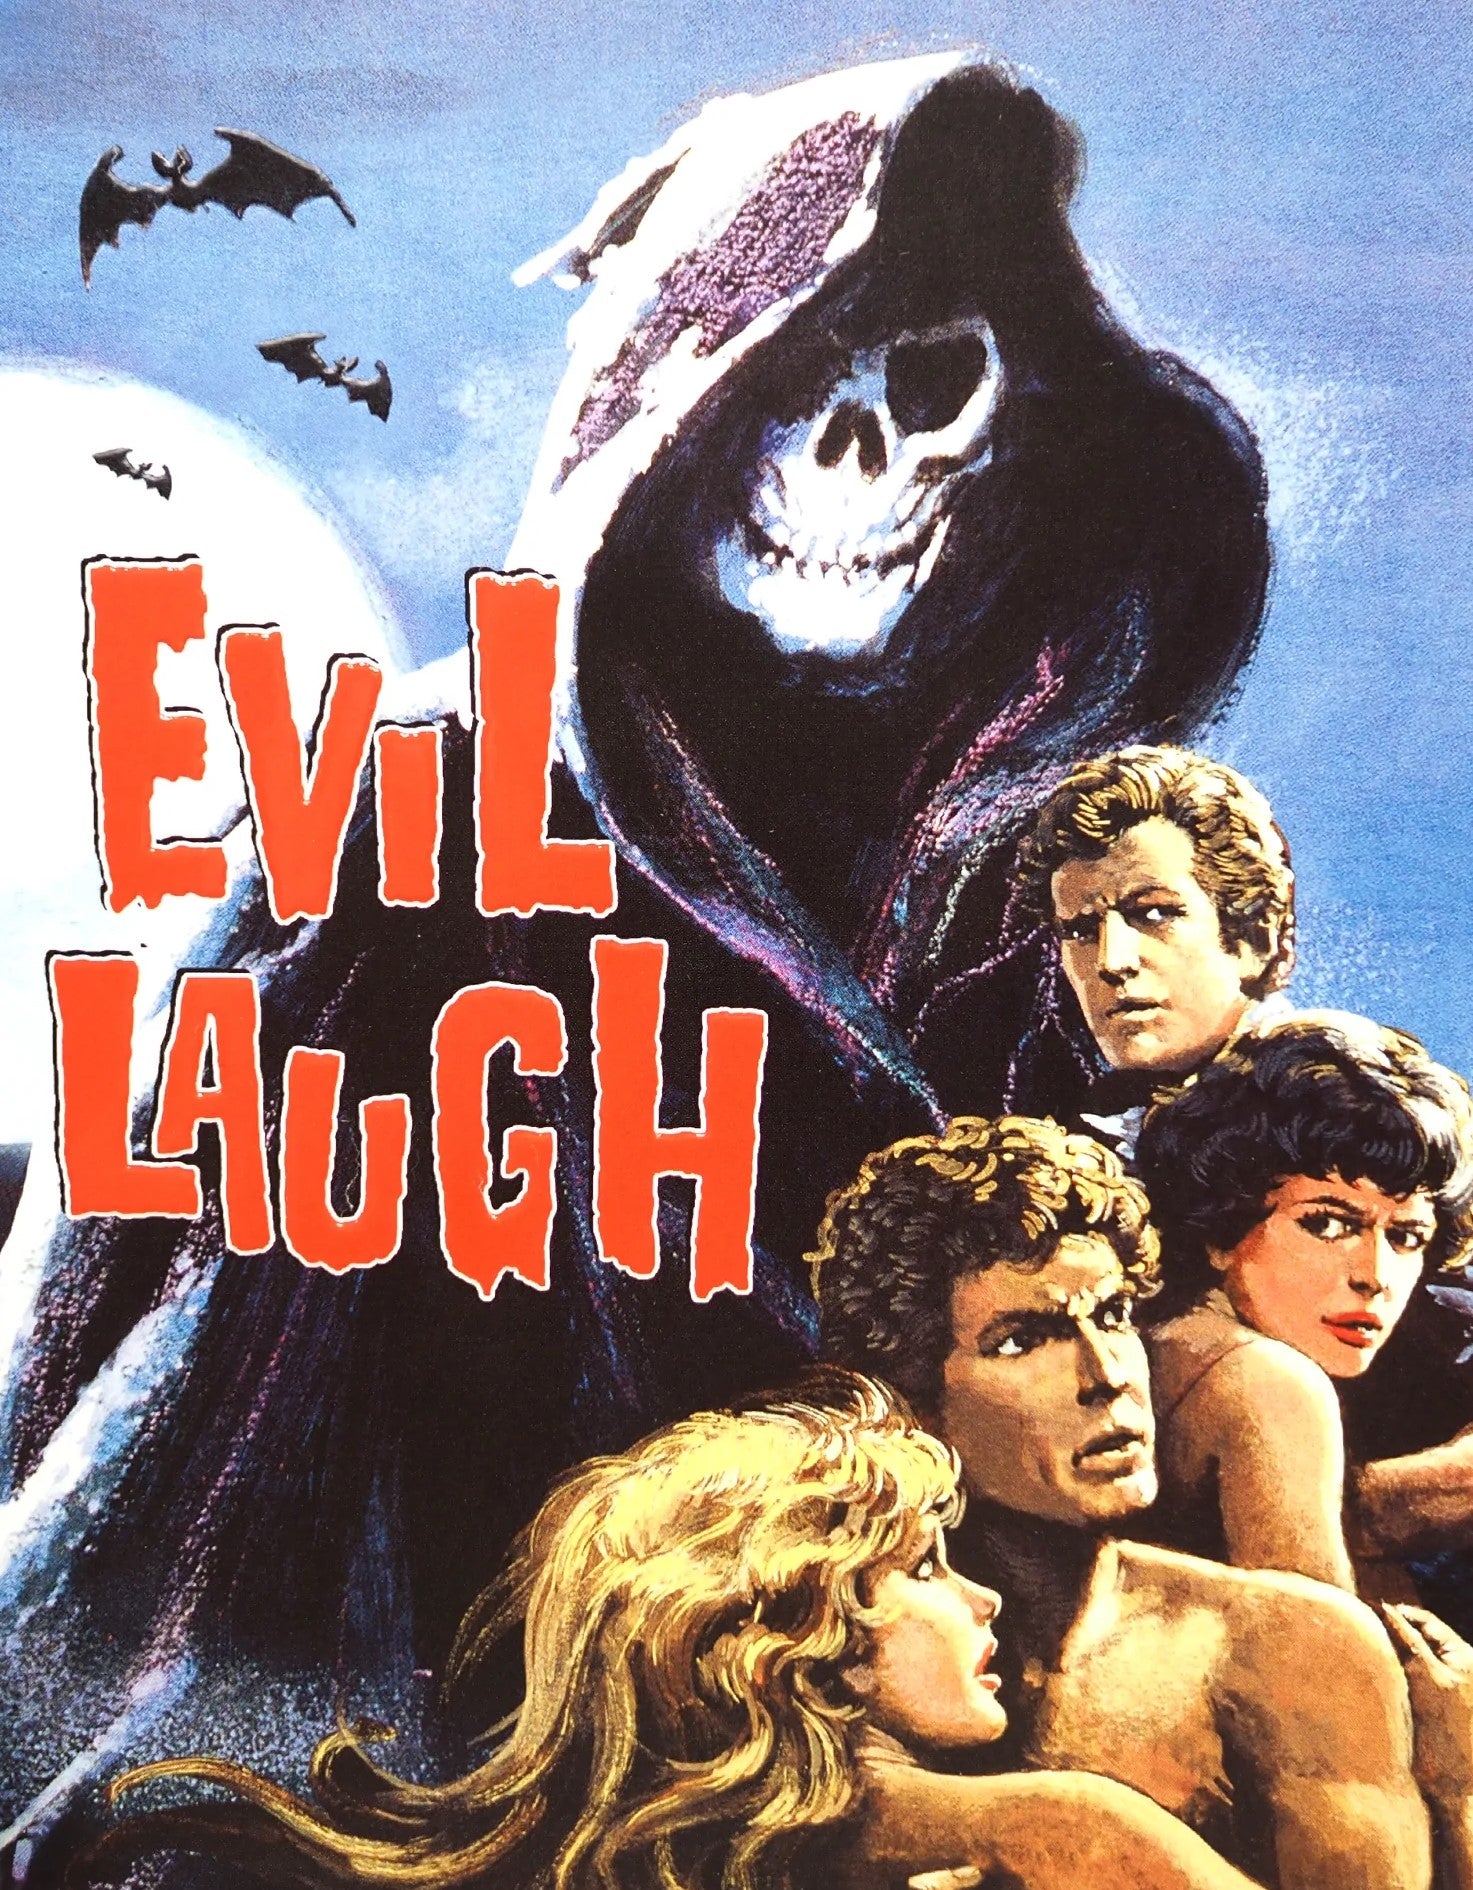 EVIL LAUGH (LIMITED EDITION) BLU-RAY